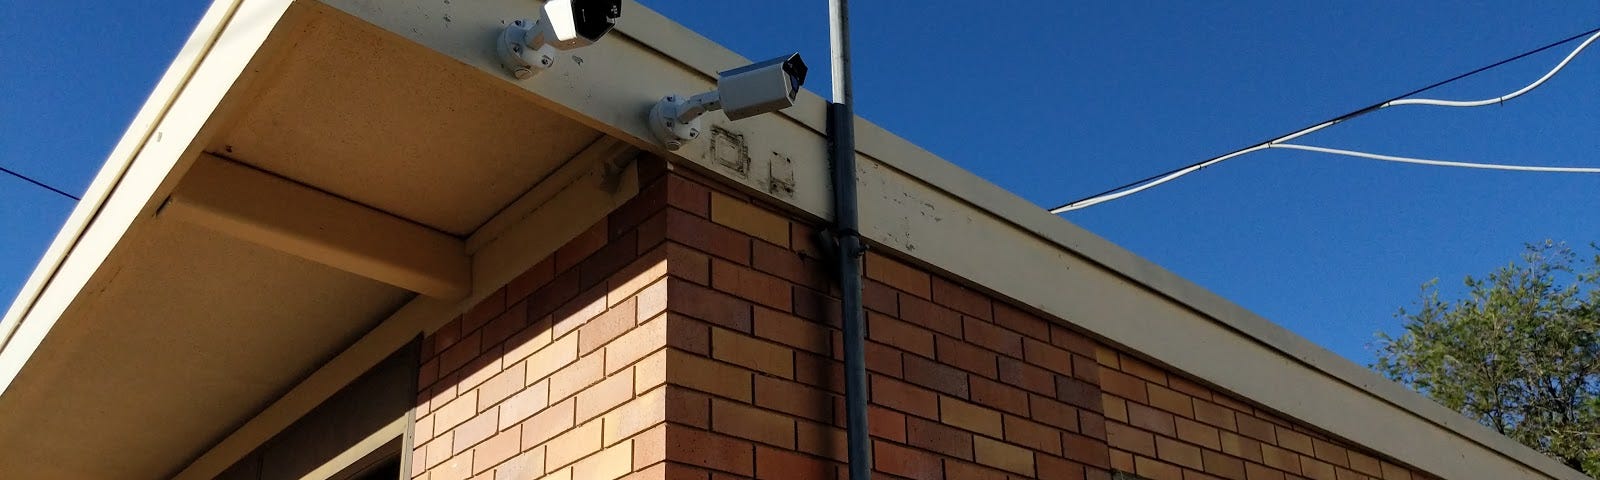 Two Umbo AiBullet cameras mounted on the side of an Urban Utilities building.